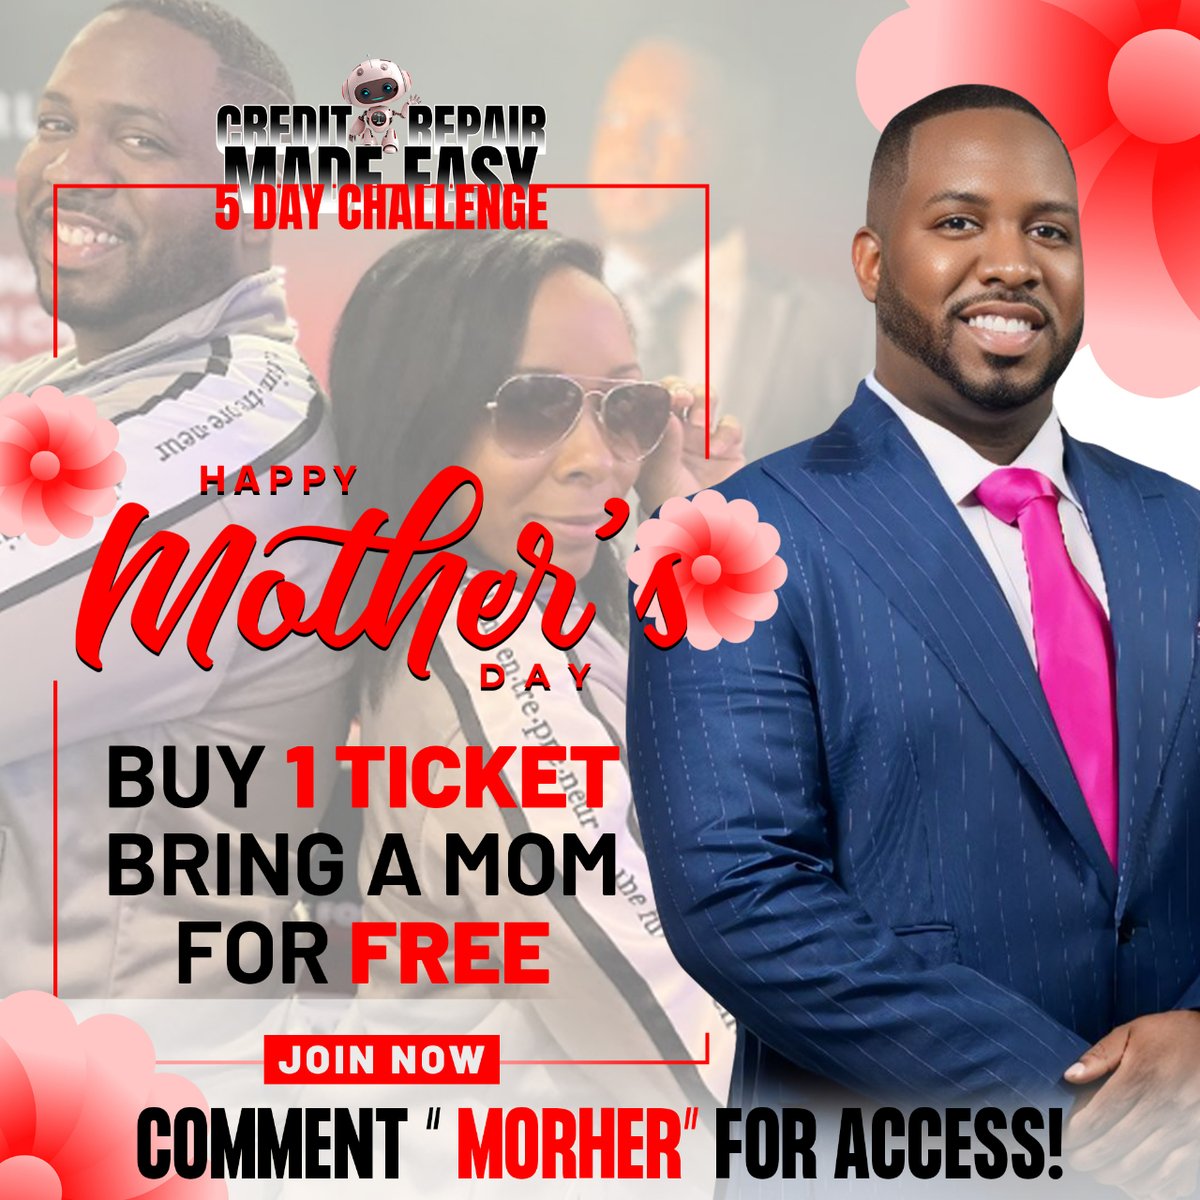 Let's make this Mother's Day unforgettable with a gift that keeps on giving: financial literacy and freedom!

 COMMENT 'MOTHER' below if you know a supermom who needs this

#ConsumerLaw #CreditRepairChallenge